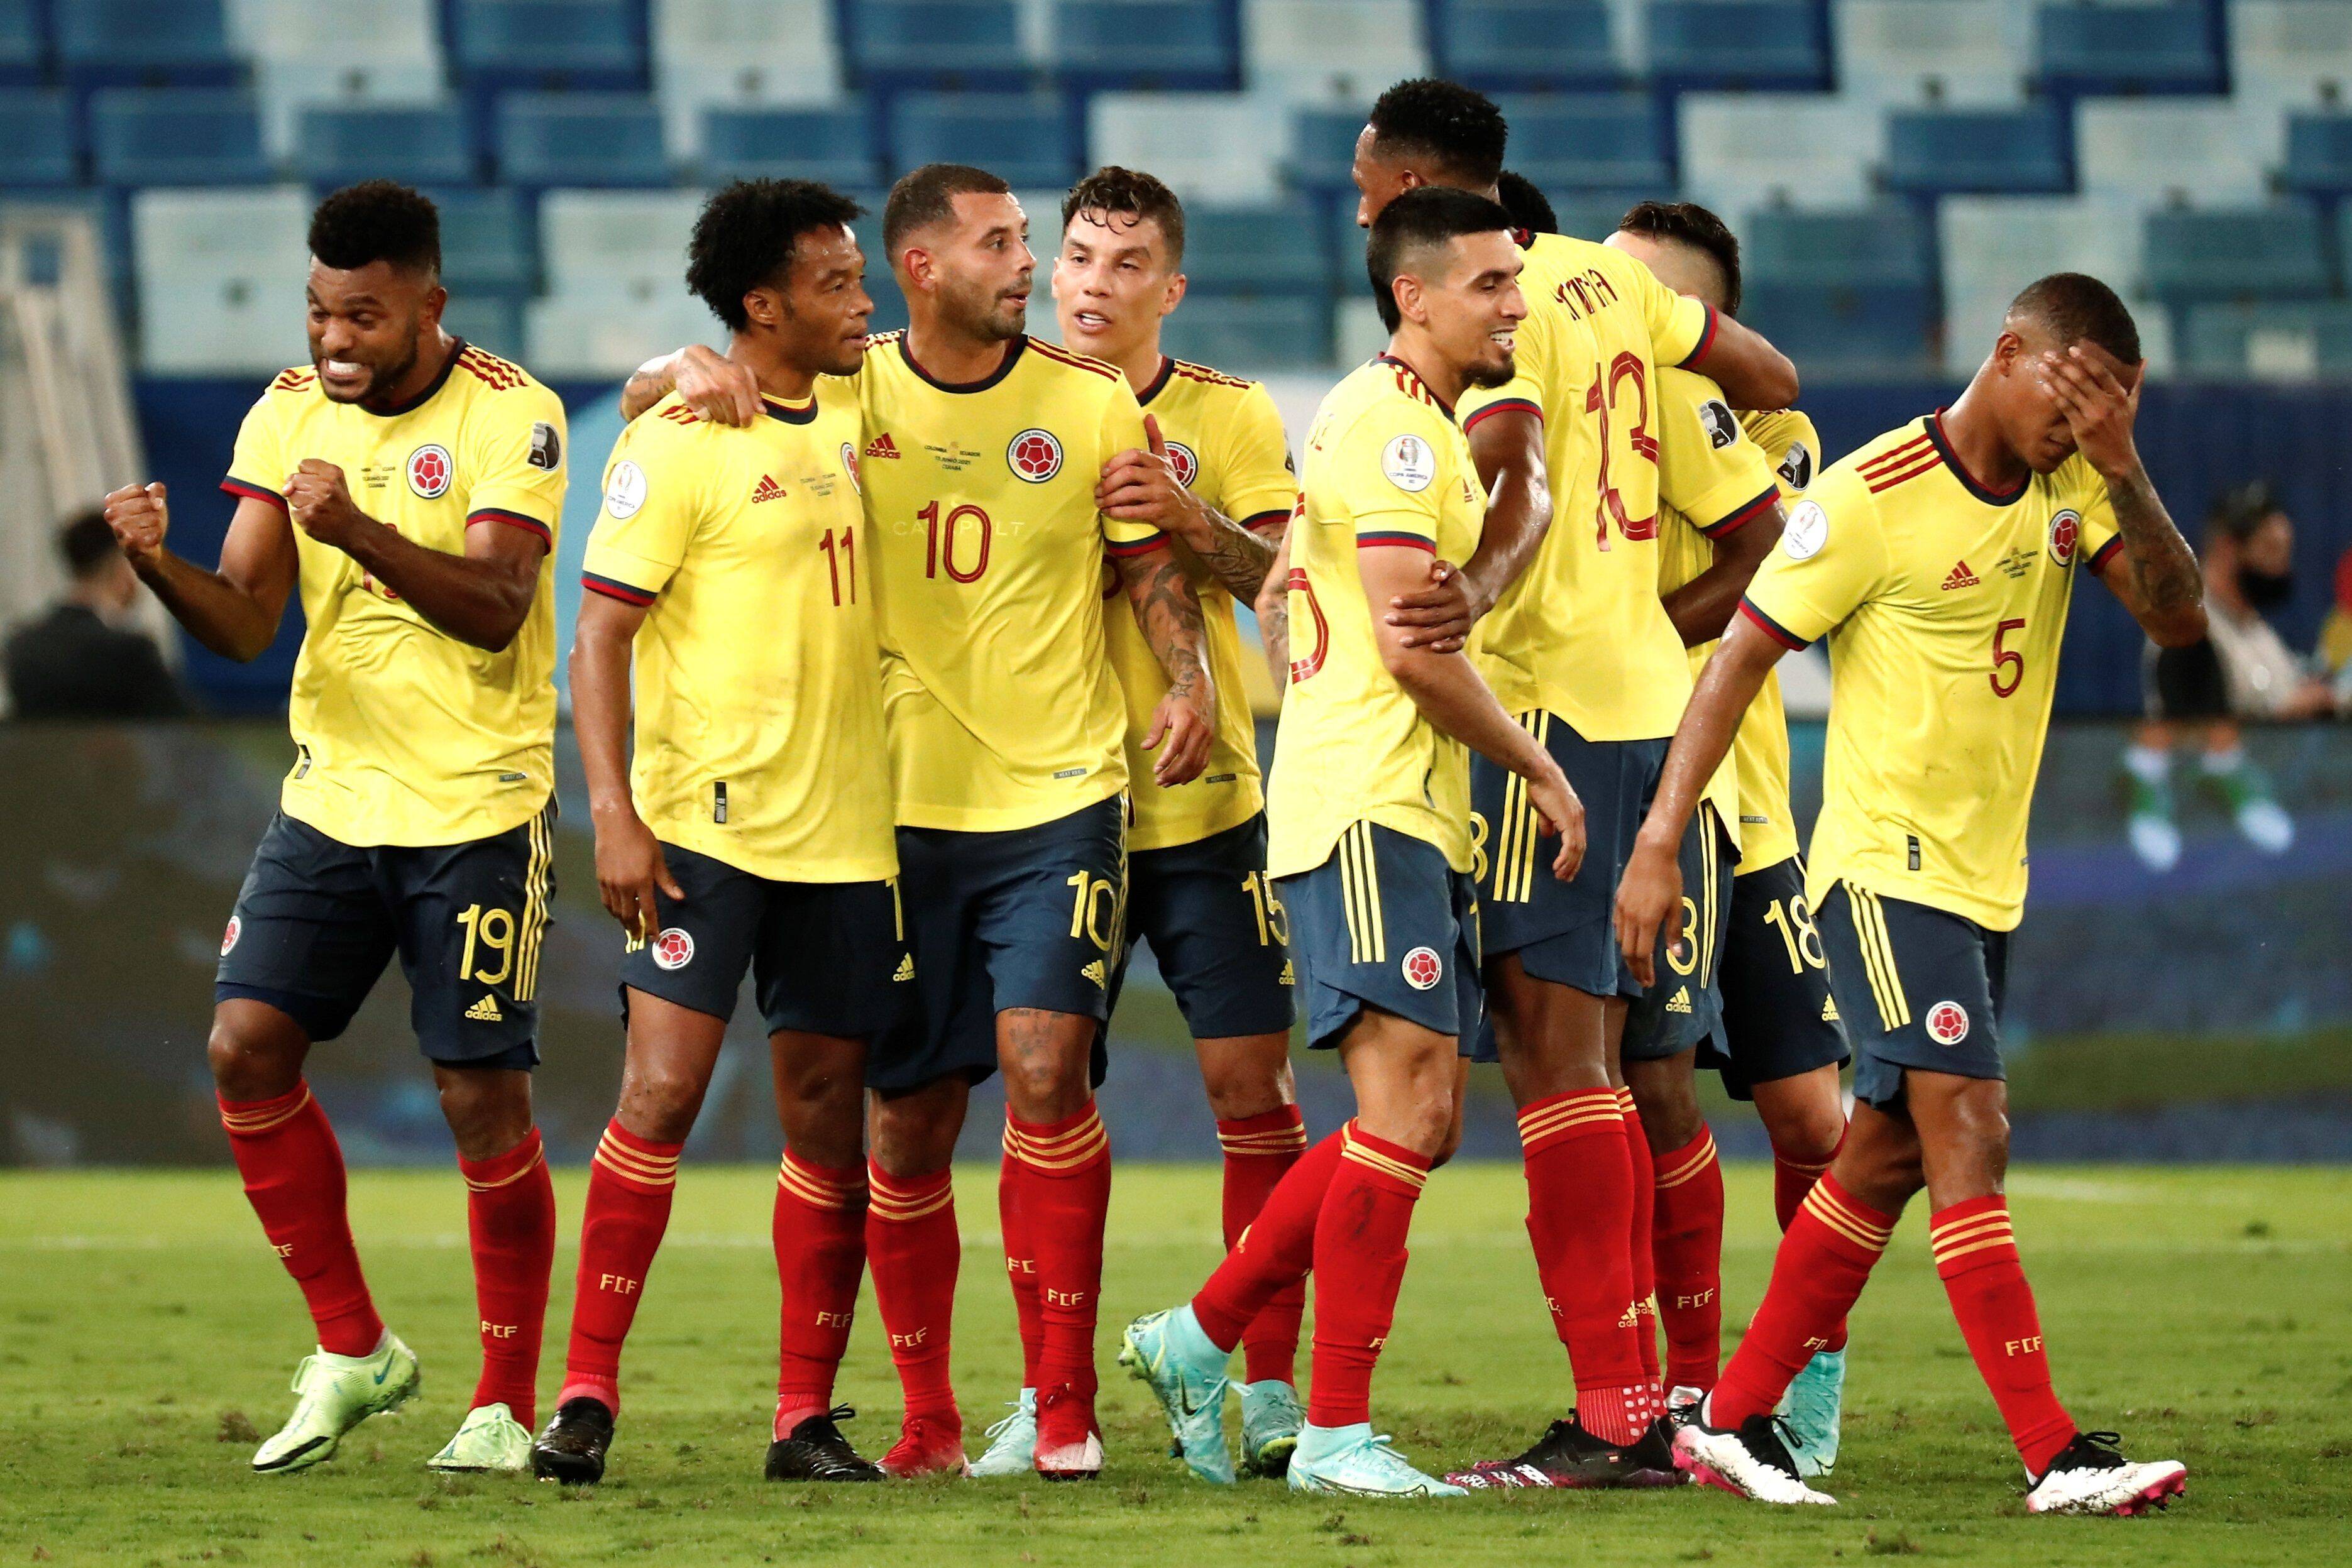 Colombian national team takes an indirect shot at Everton midfielder